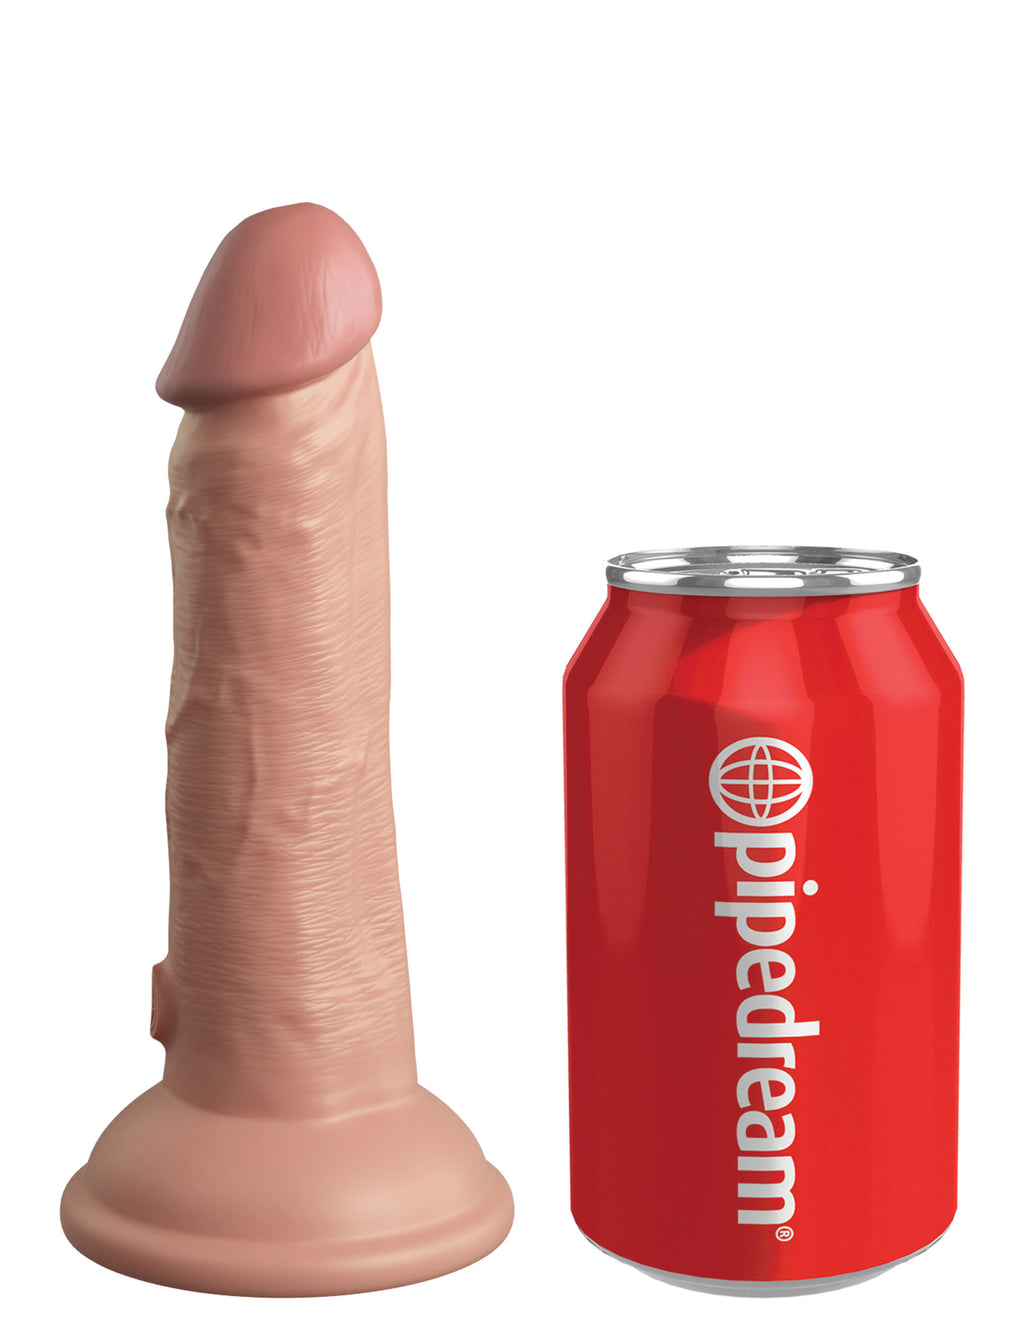 King Cock Elite 6 Inch Silicone Dual Density Cock  - Light